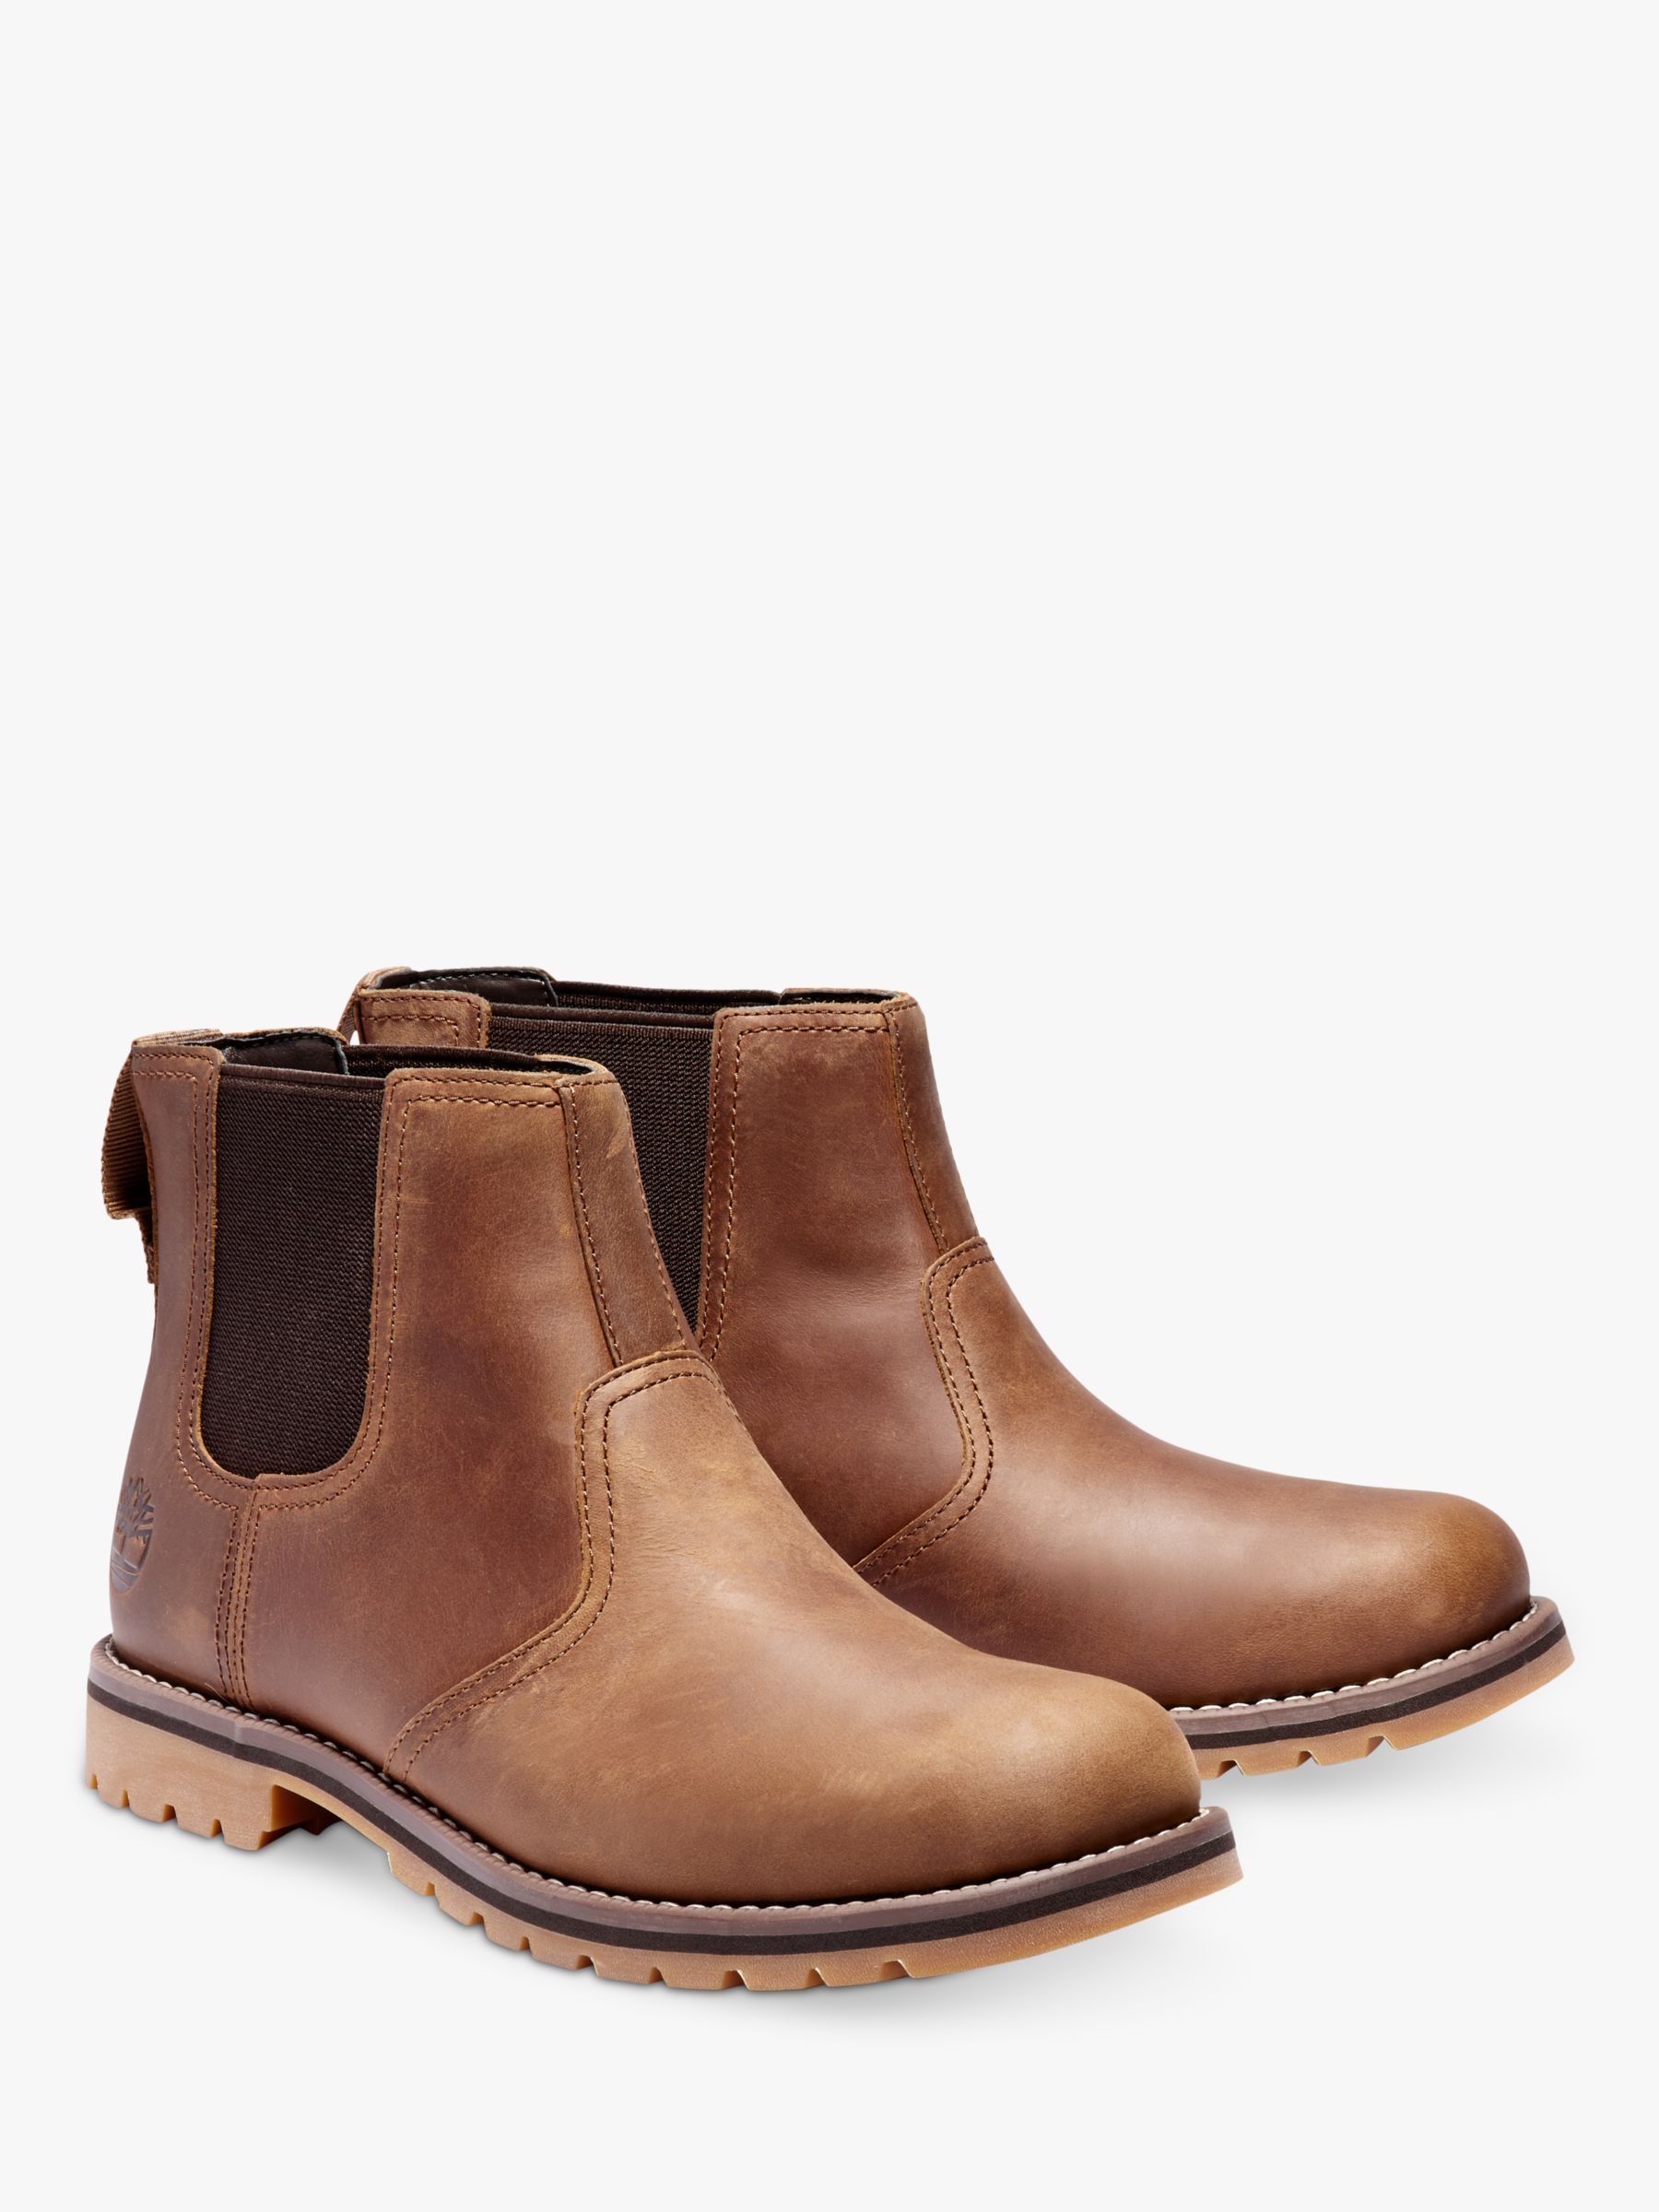 Timberland Larchmont Chelsea Boots, Rust John Lewis &